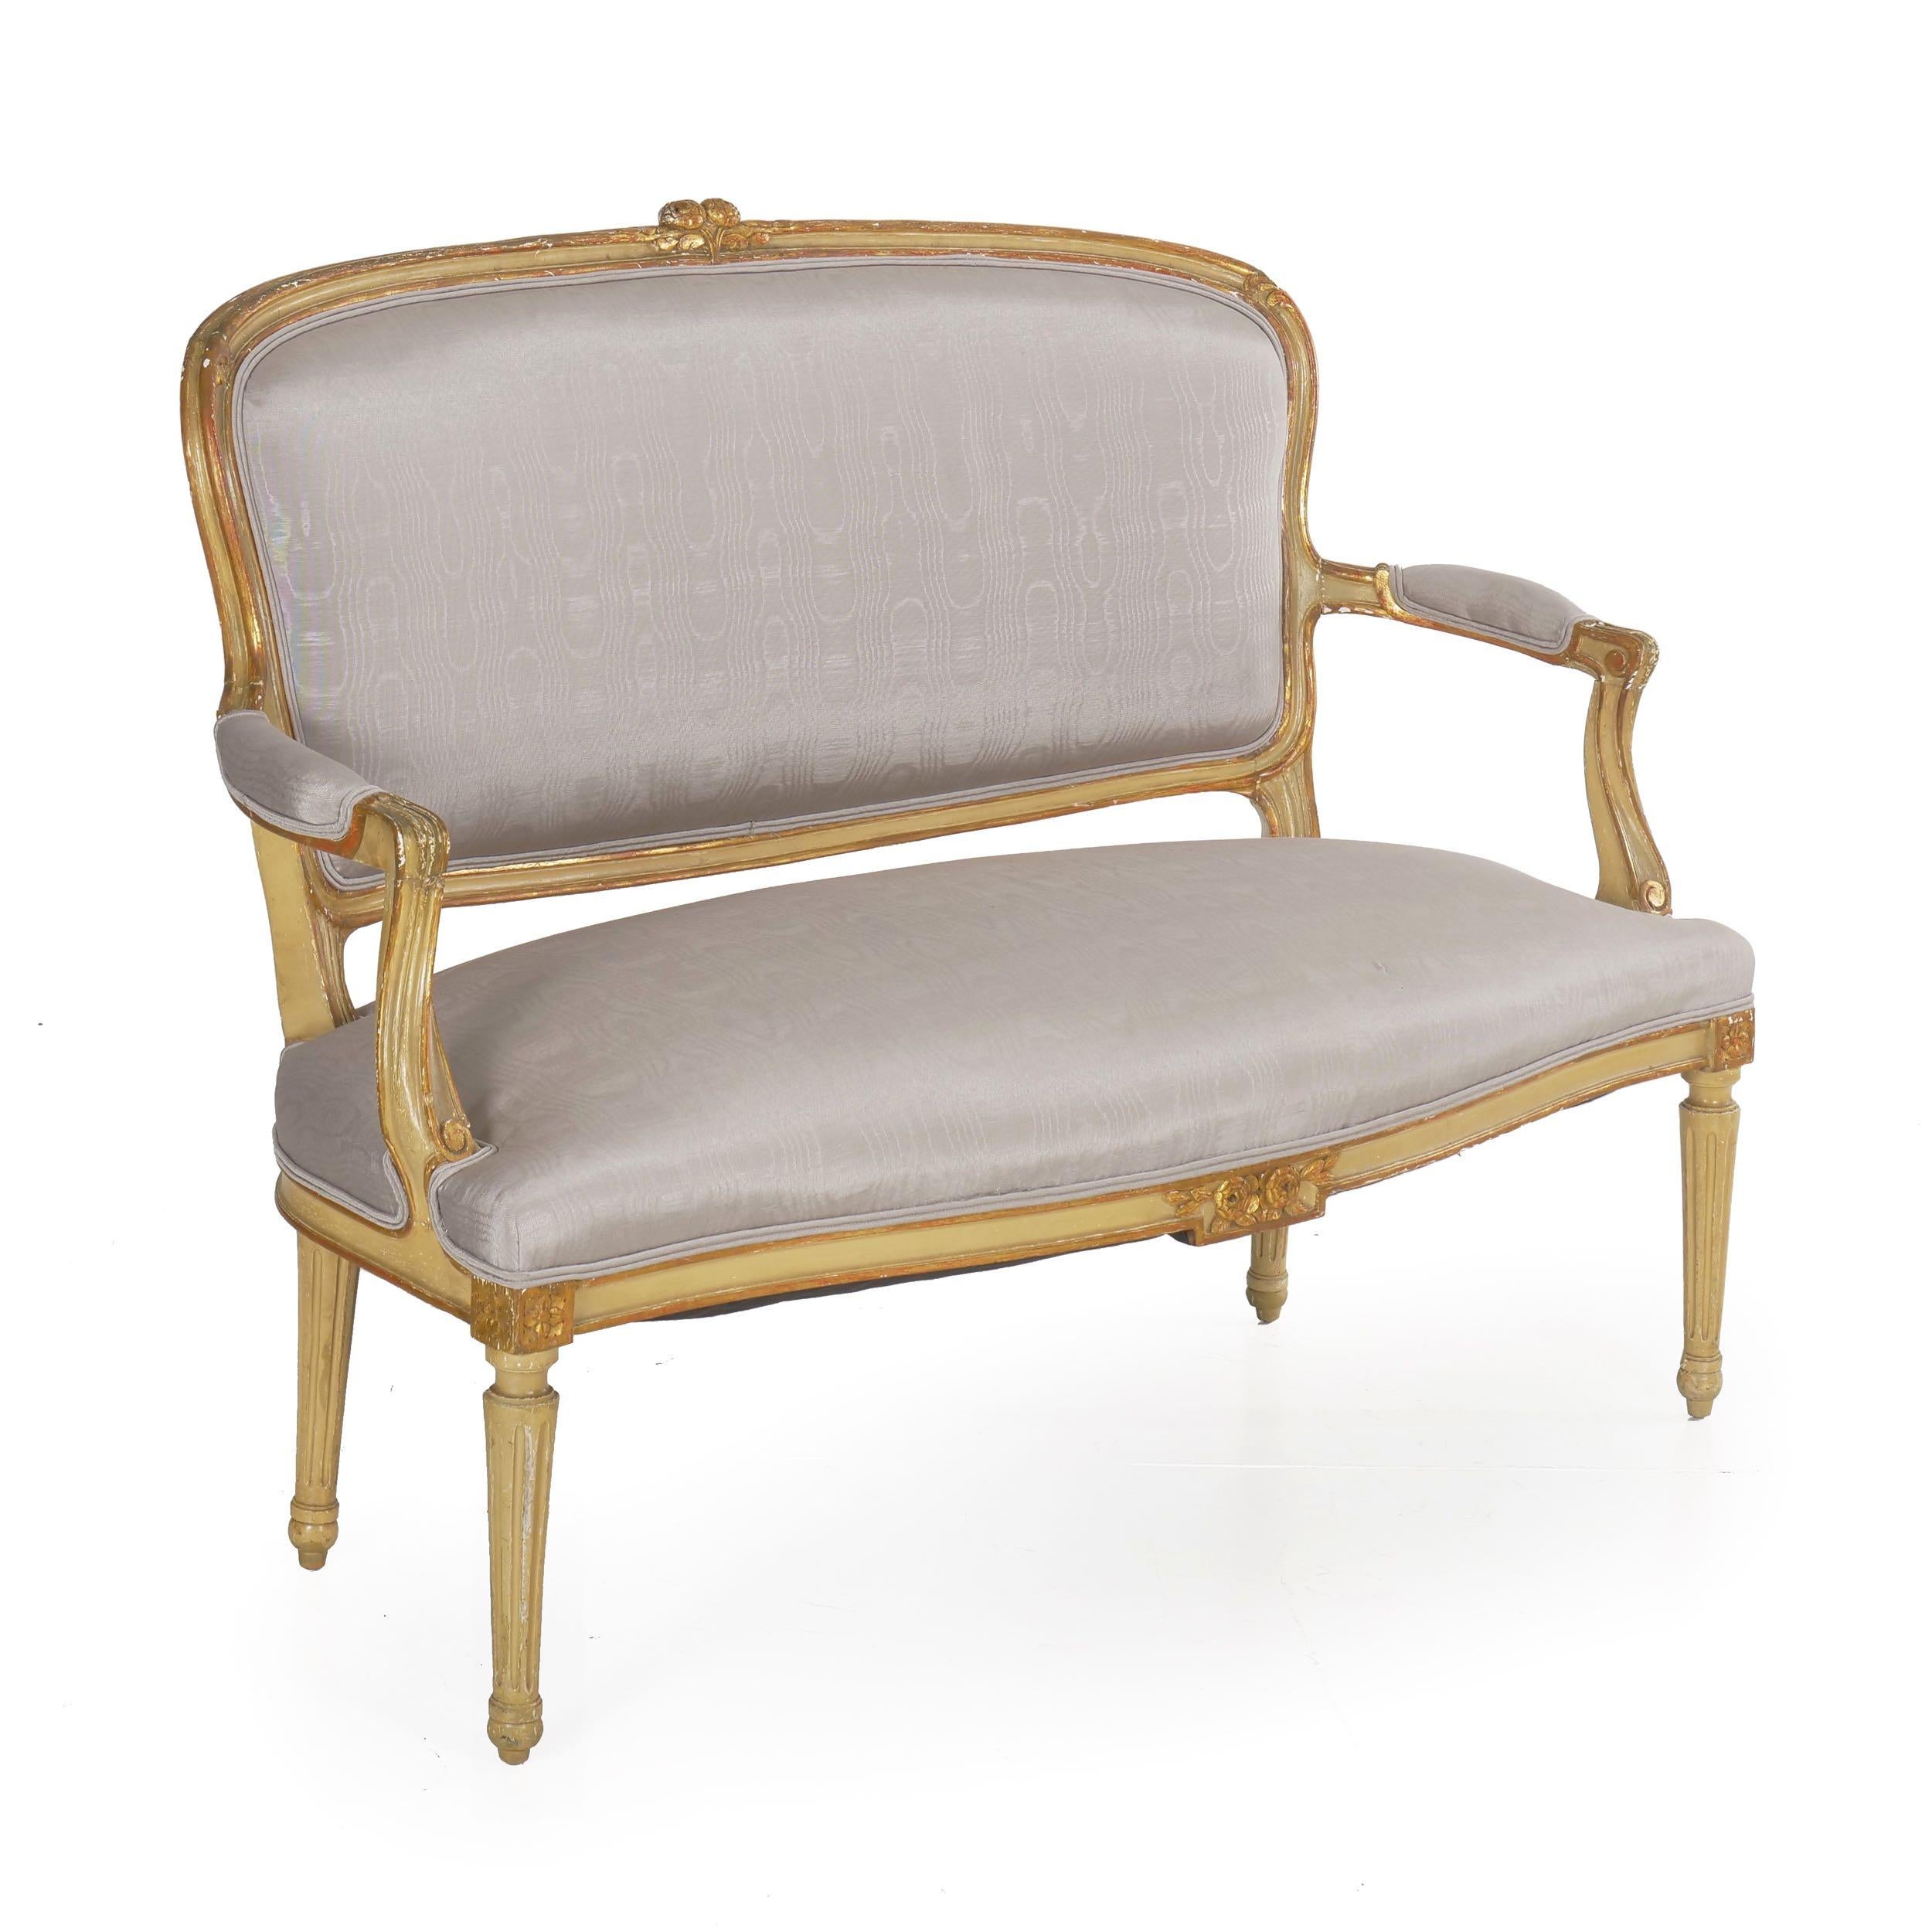 French neoclassical carved and painted beechwood settee,
circa late 19th century
Item # 007CPB30K

This fantastic 19th century settee is carved in the taste of the Louis XVI period with the typical fluted legs, cabriolet arm supports, and simple